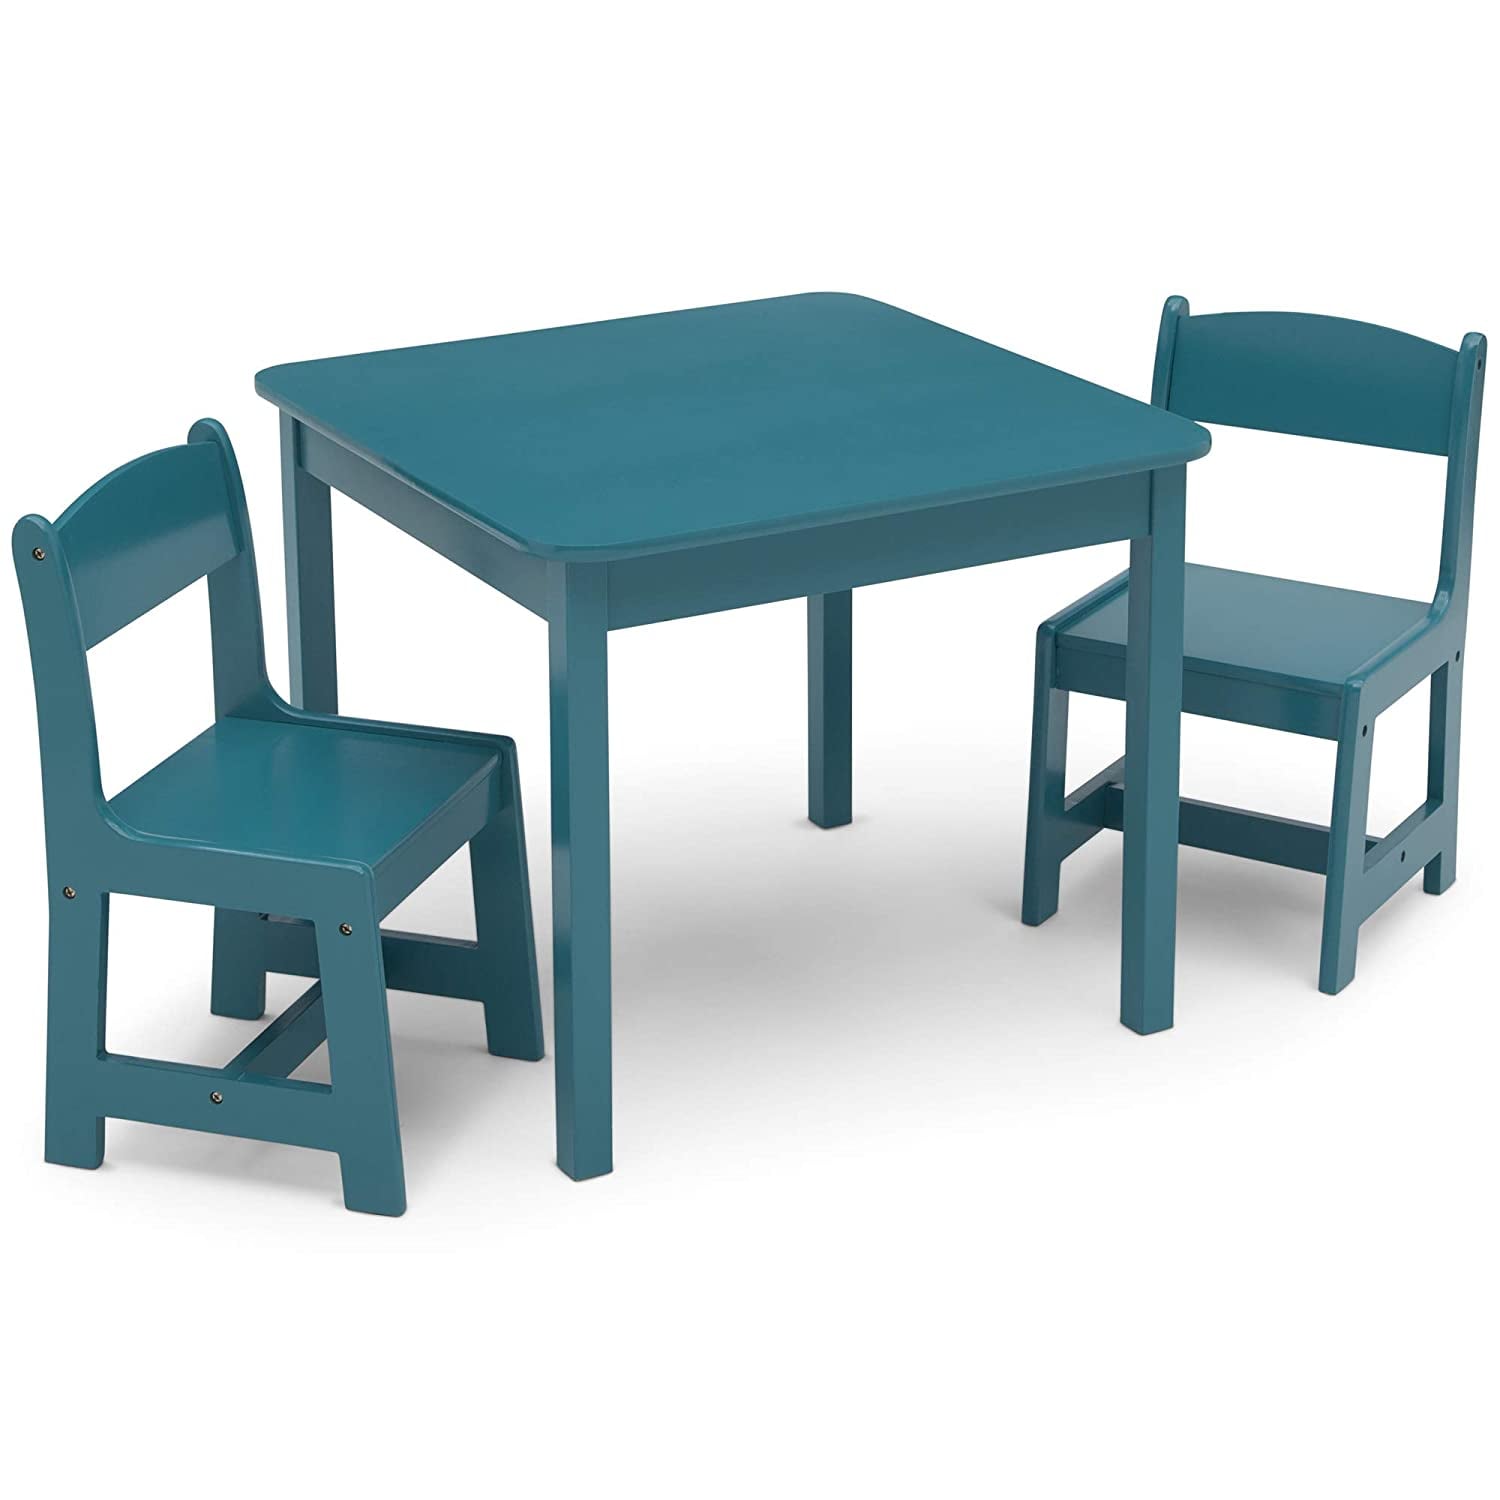 studio childrens table and chairs